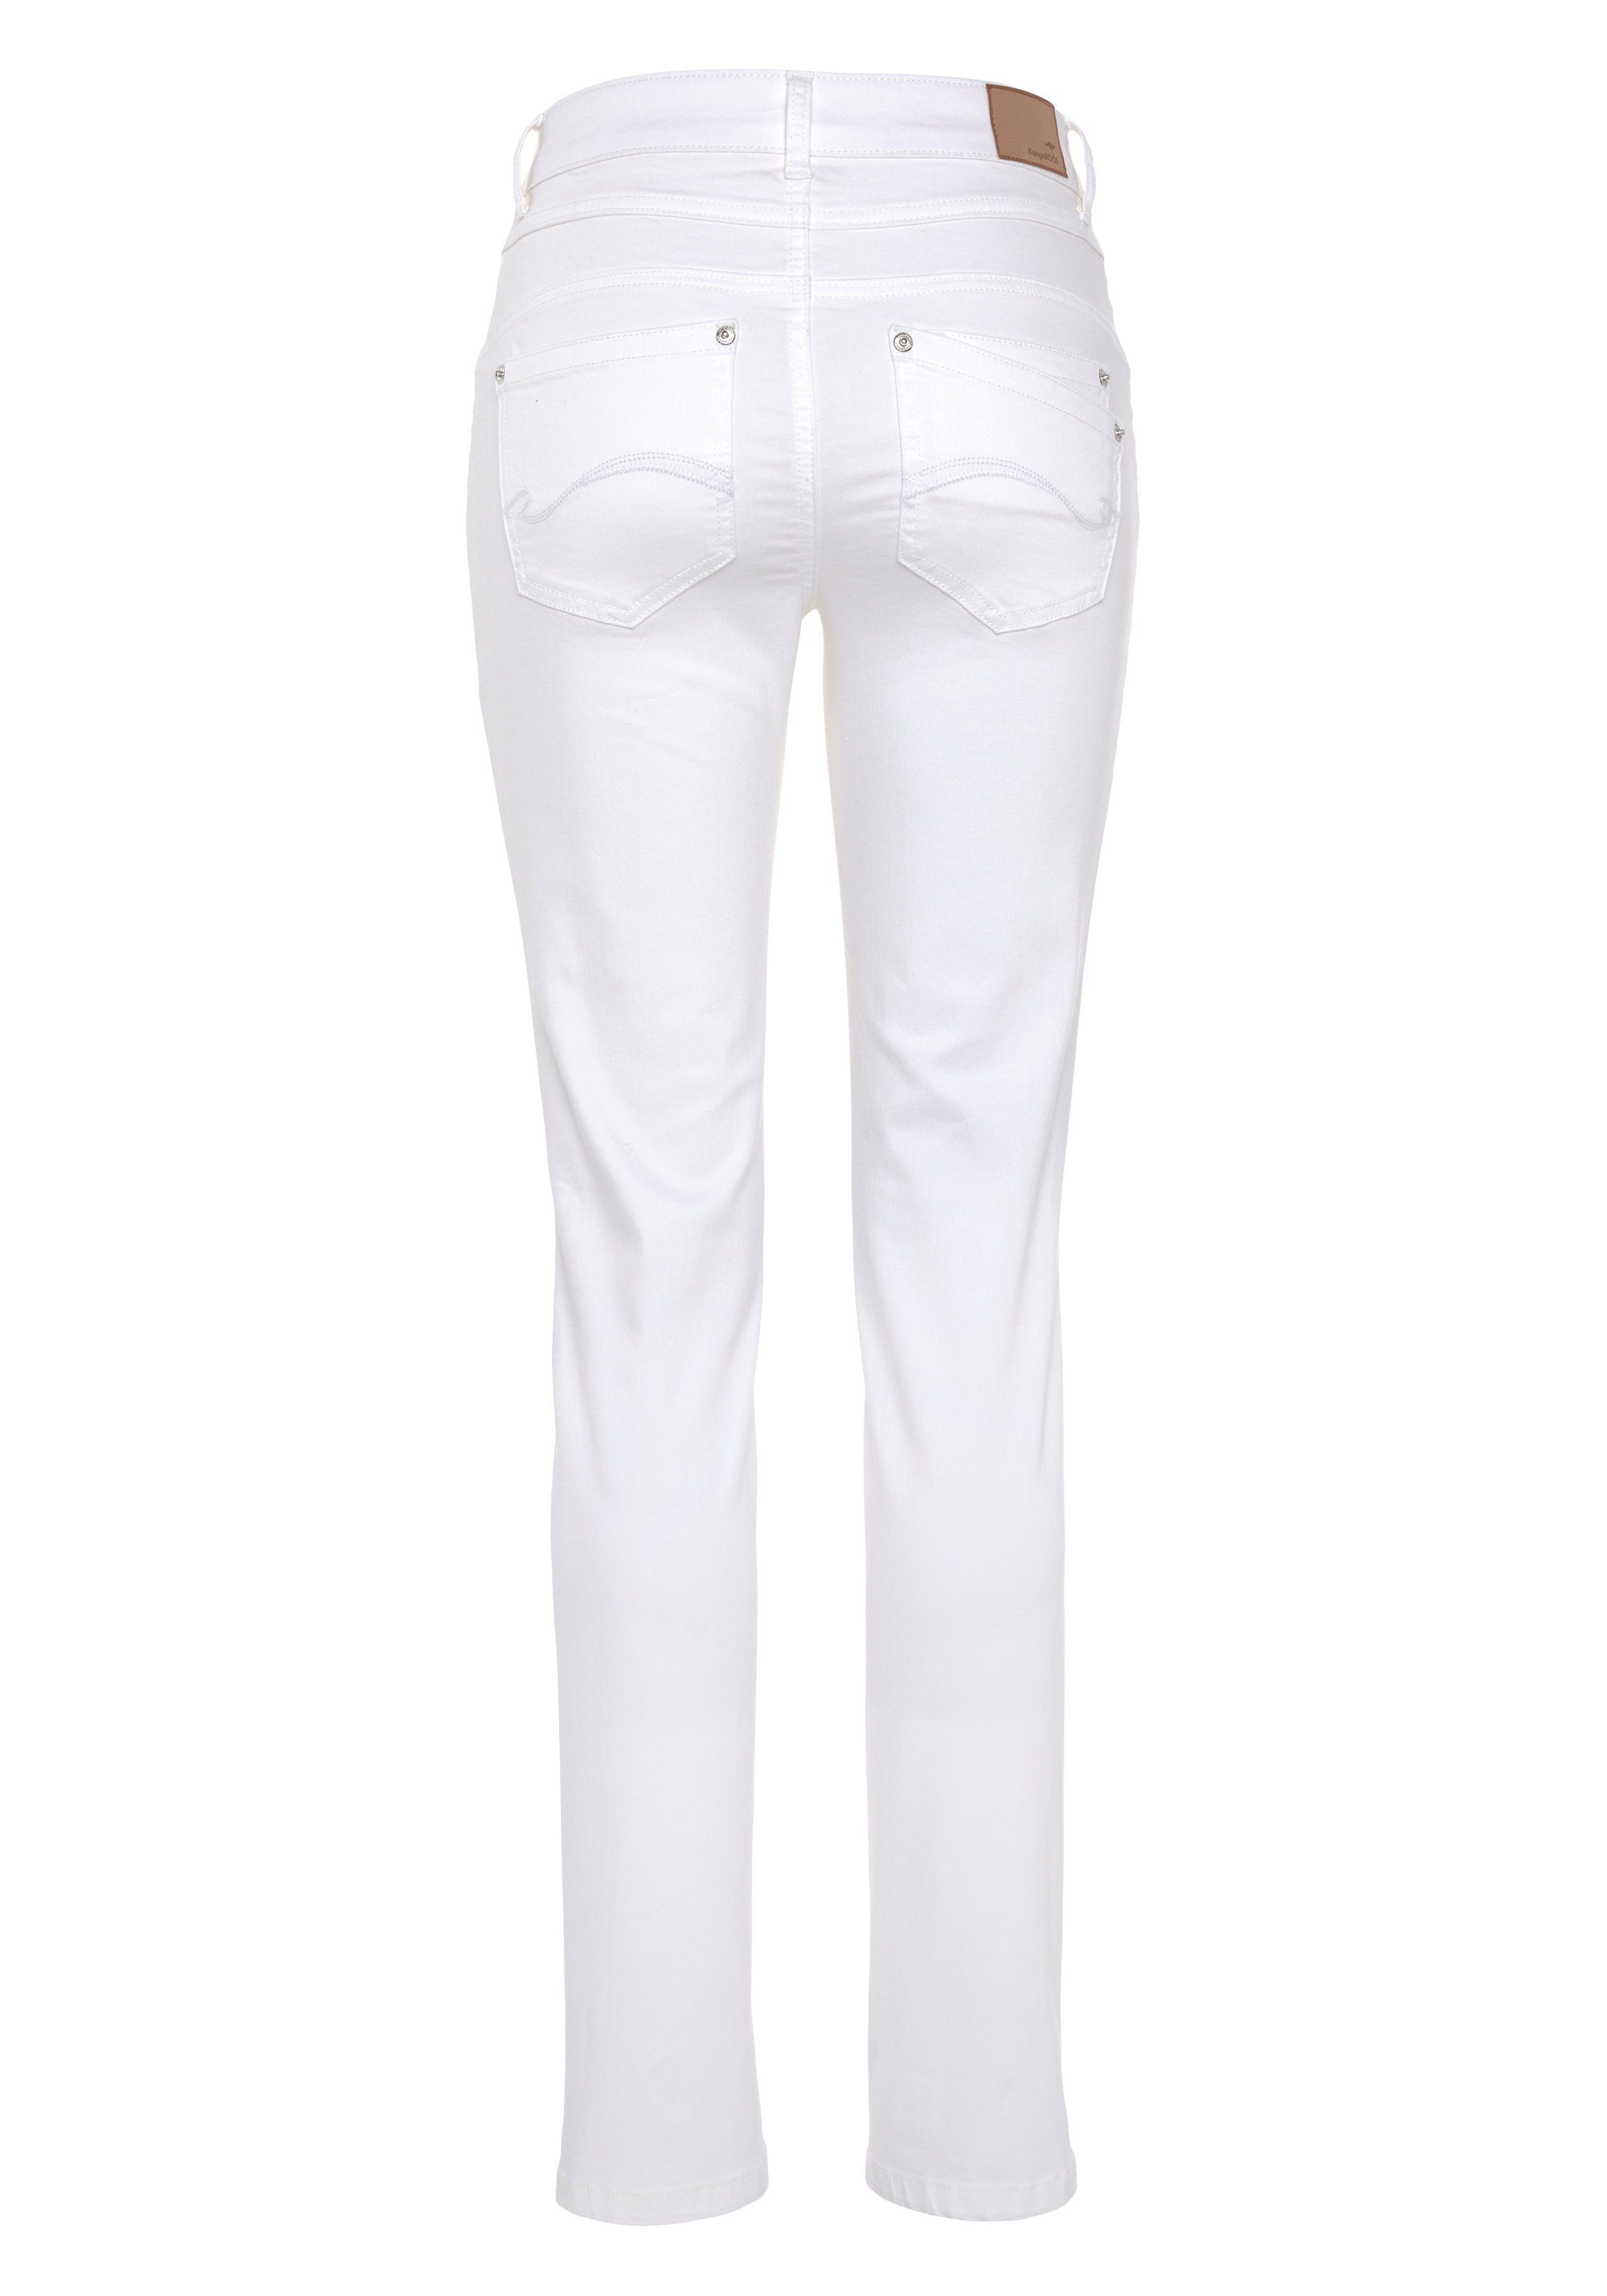 KangaROOS Relax-fit-Jeans WAIST RELAX-FIT white HIGH